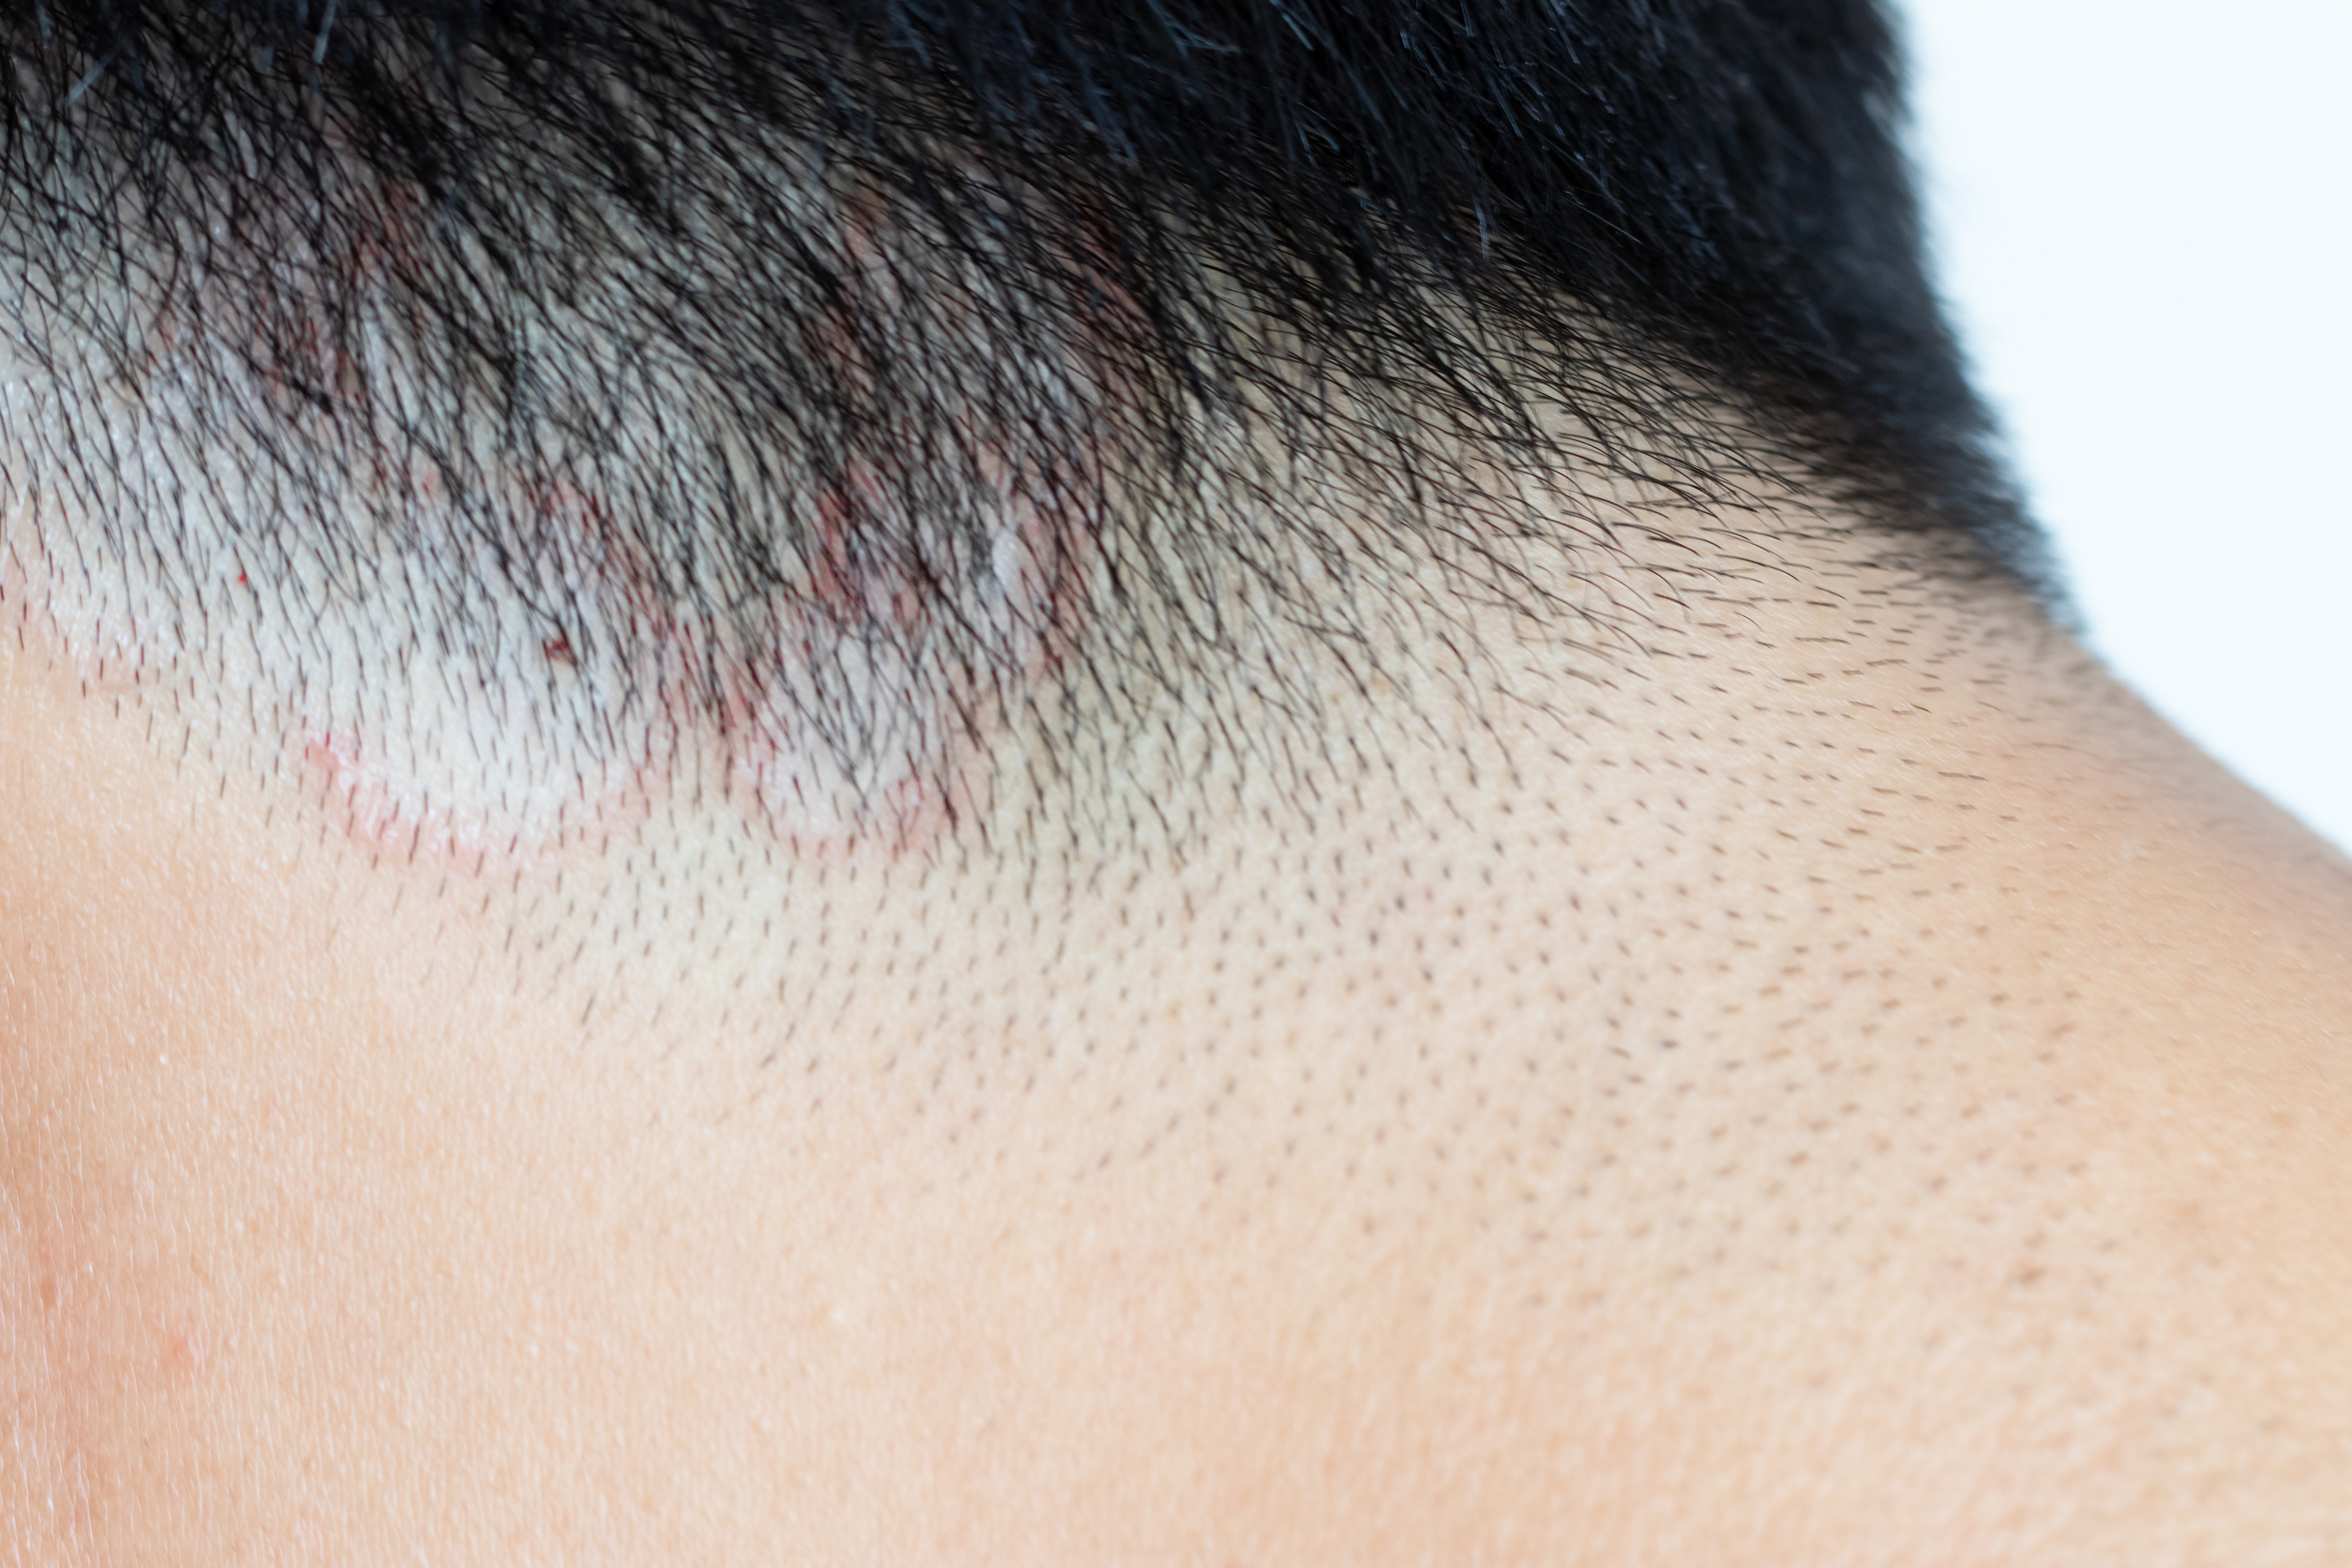 Typical ringworm lesions on the scalp of a man